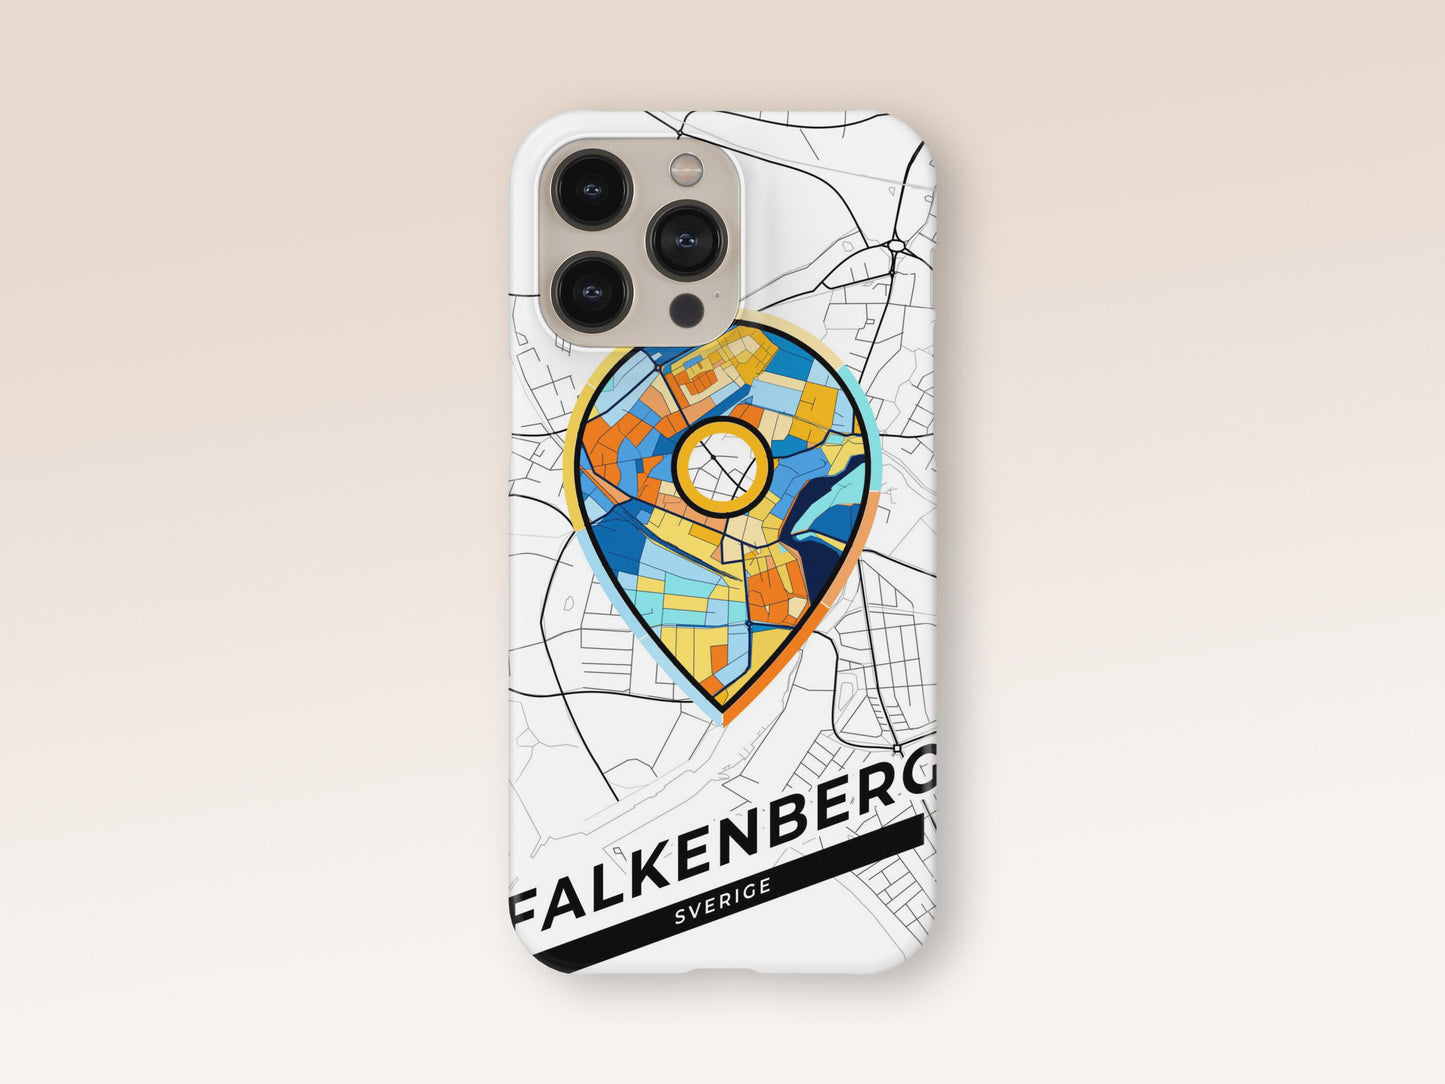 Falkenberg Sweden slim phone case with colorful icon. Birthday, wedding or housewarming gift. Couple match cases. 1